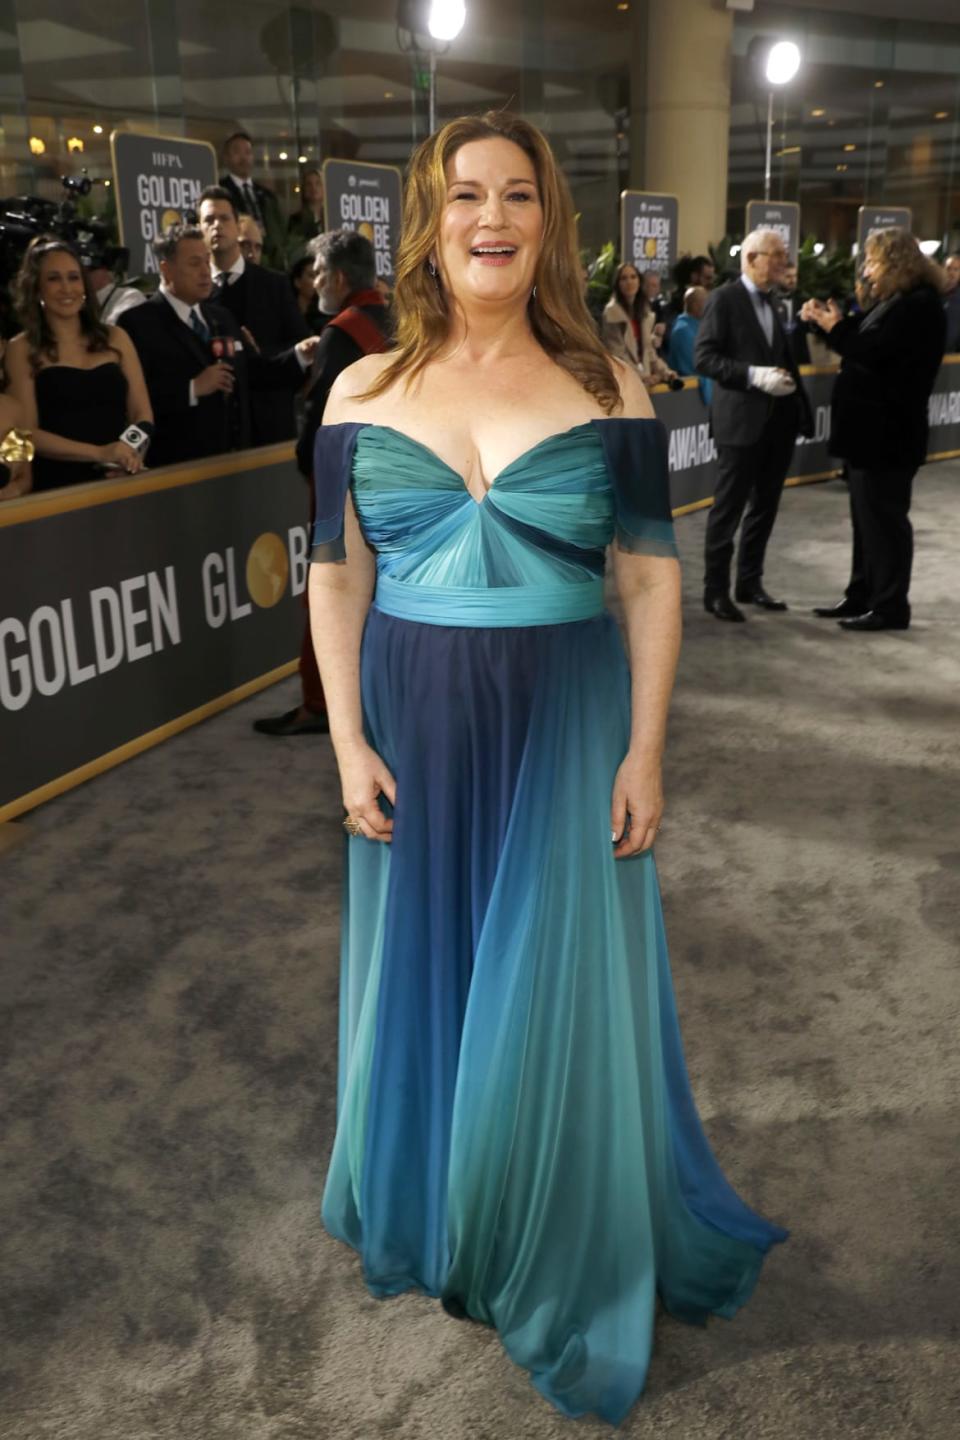 <div class="inline-image__caption"><p>Ana Gasteyer arrives at the 80th Annual Golden Globe Awards held at the Beverly Hilton Hotel on January 10, 2023 in Beverly Hills, California.</p></div> <div class="inline-image__credit">Trae Patton/NBC</div>